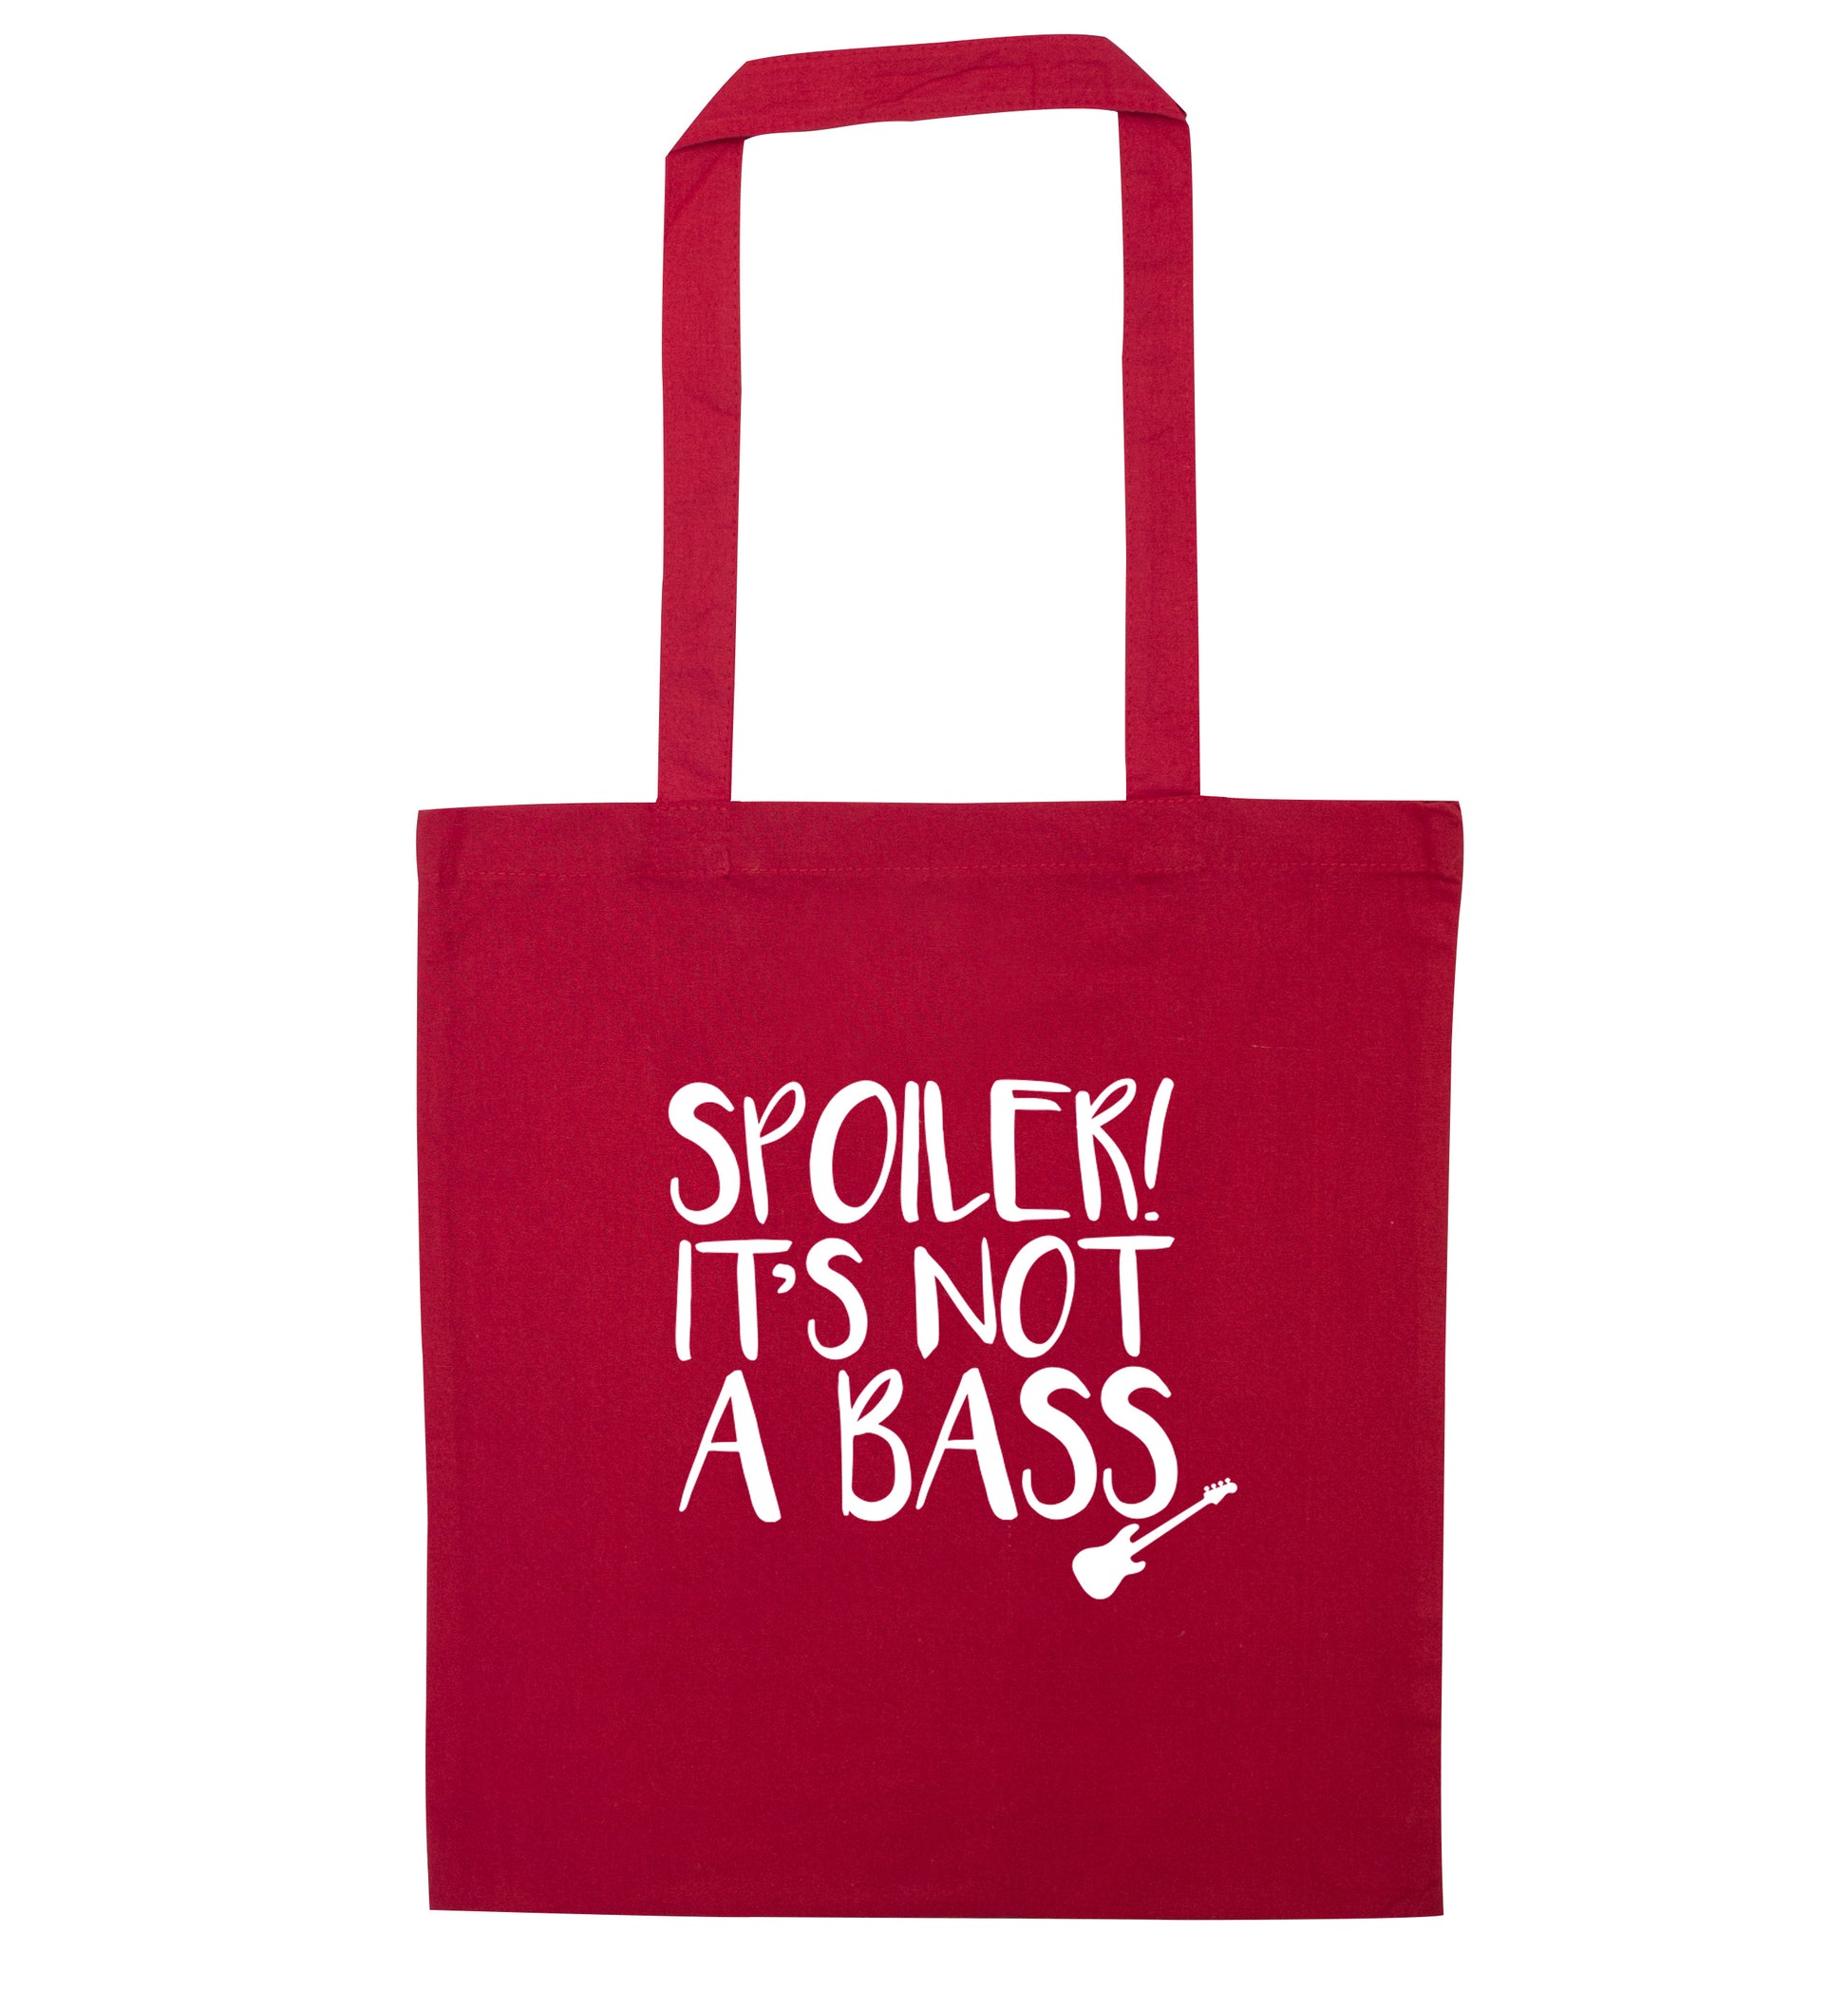 Spoiler it's not a bass red tote bag